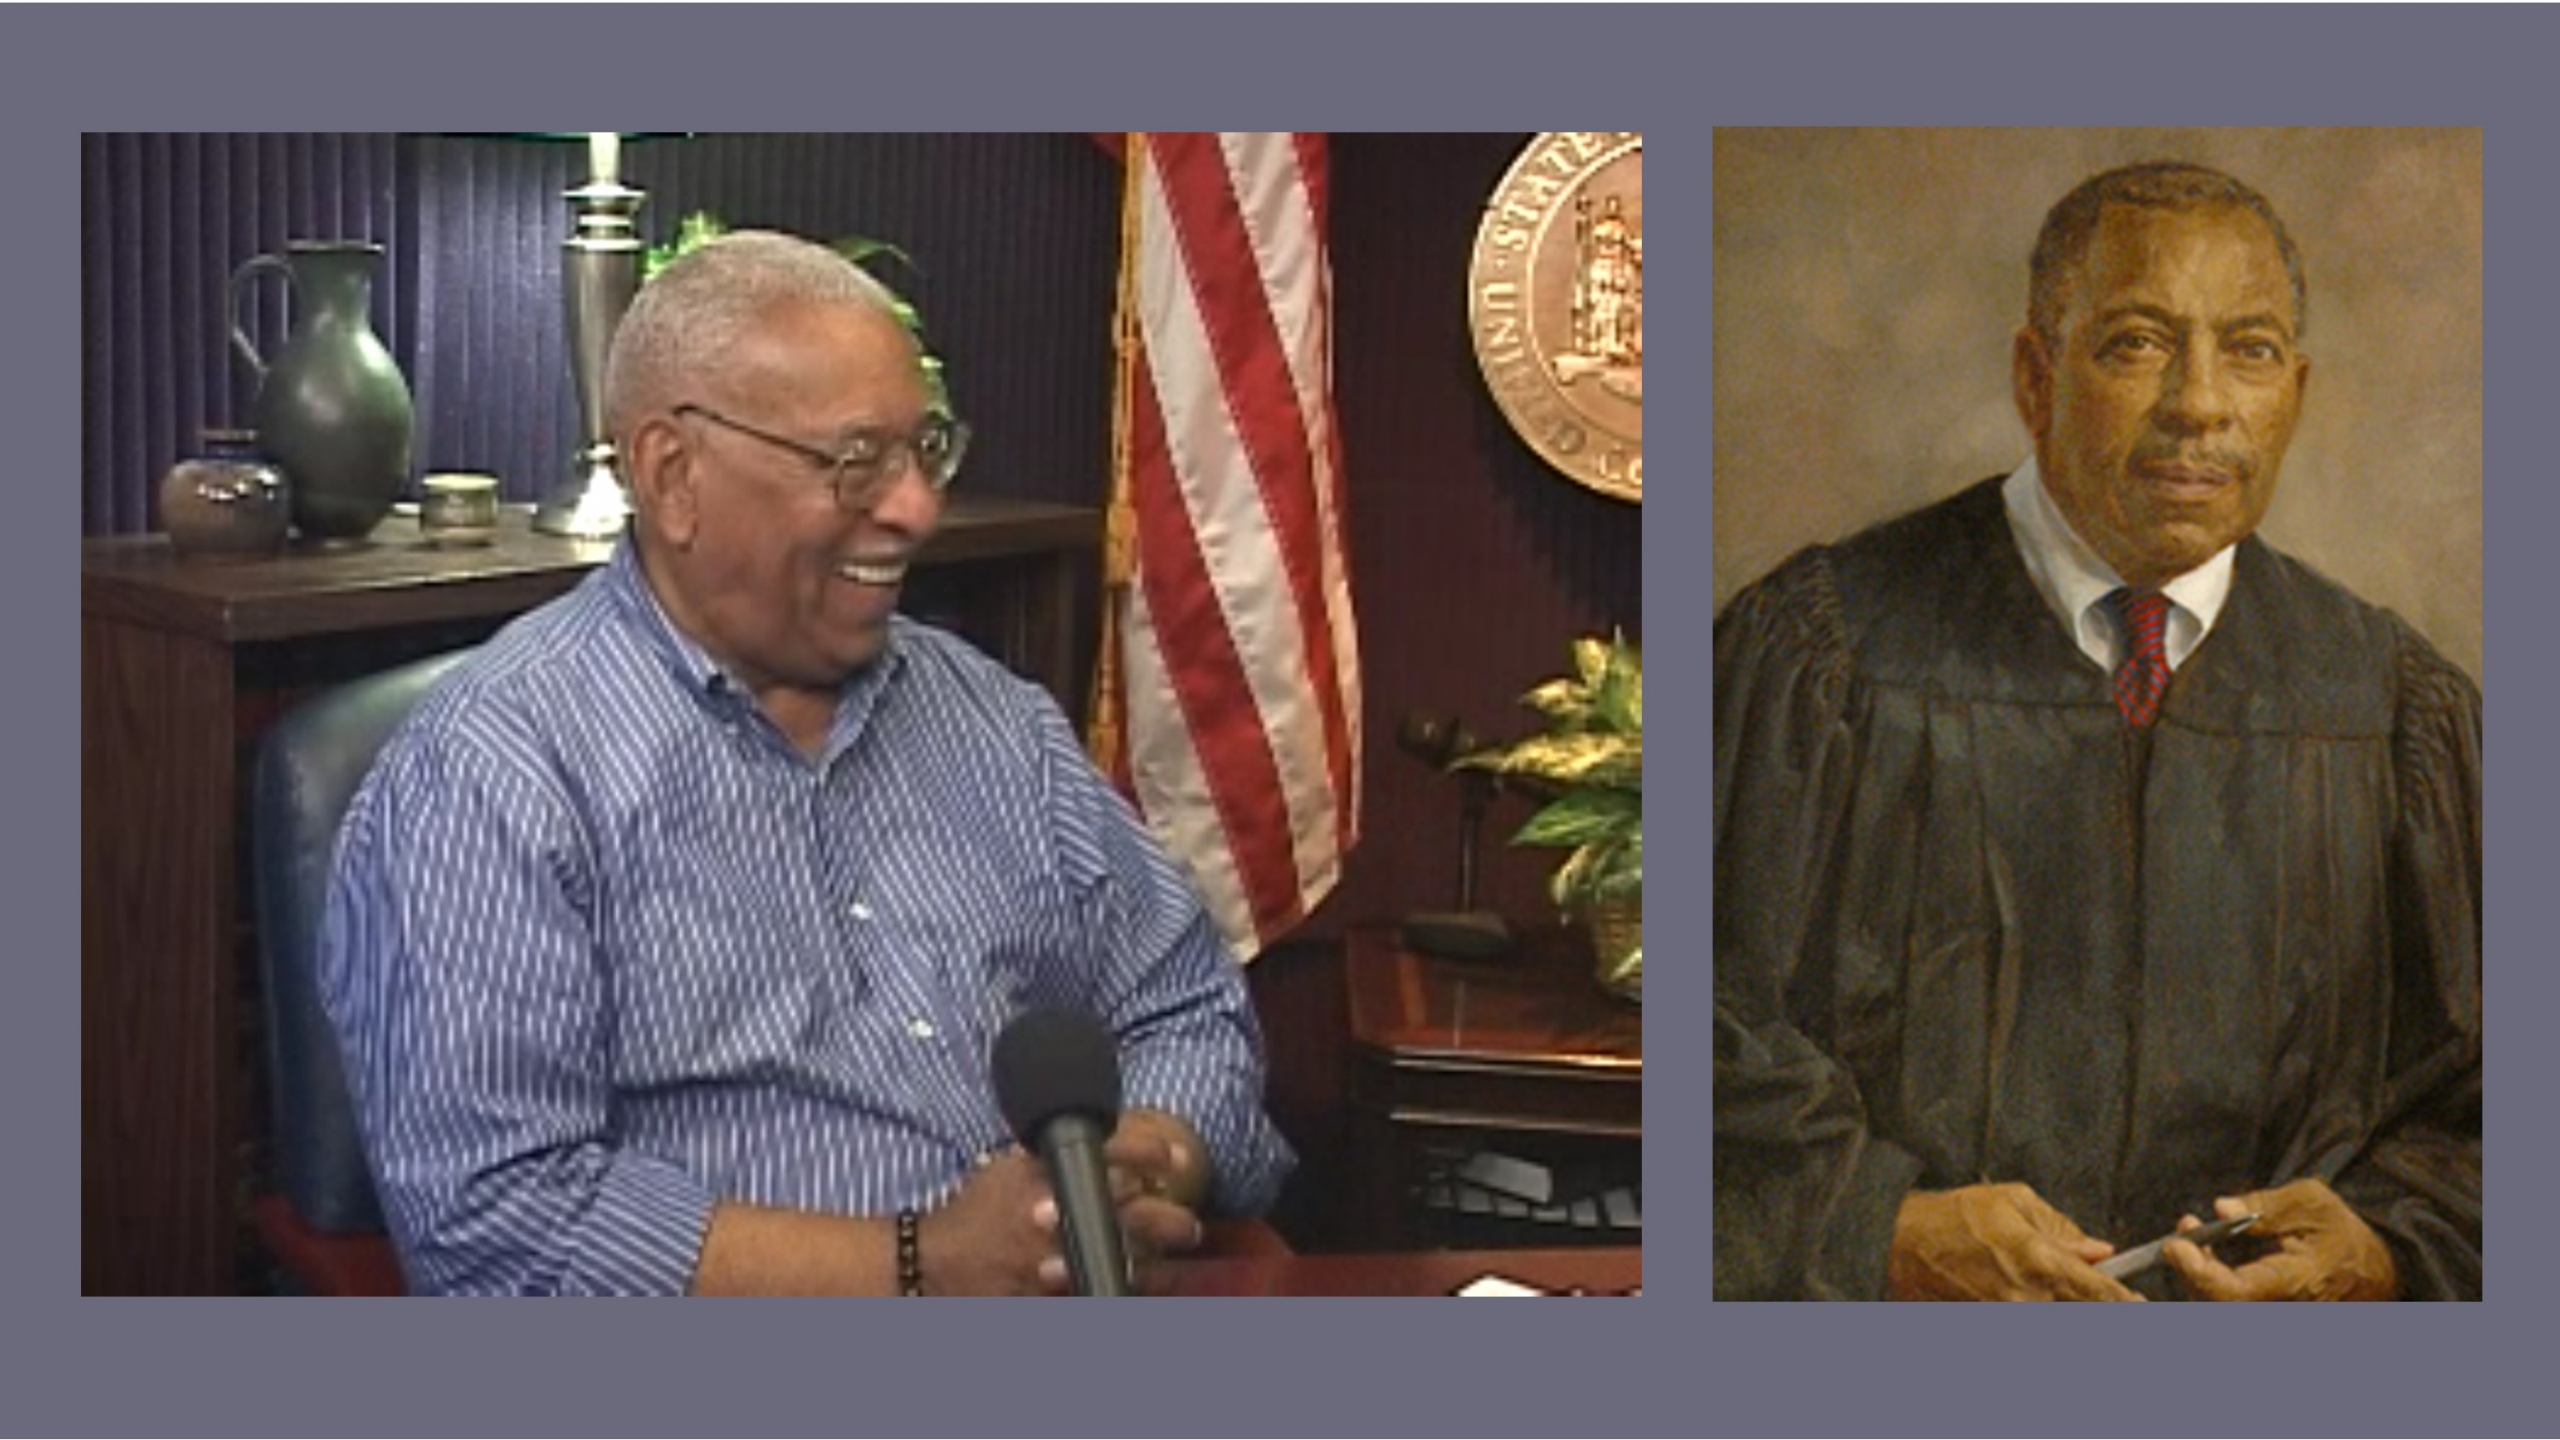 The Oral Histories of Hon. George Bundy Smith and Hon. William C. Thompson